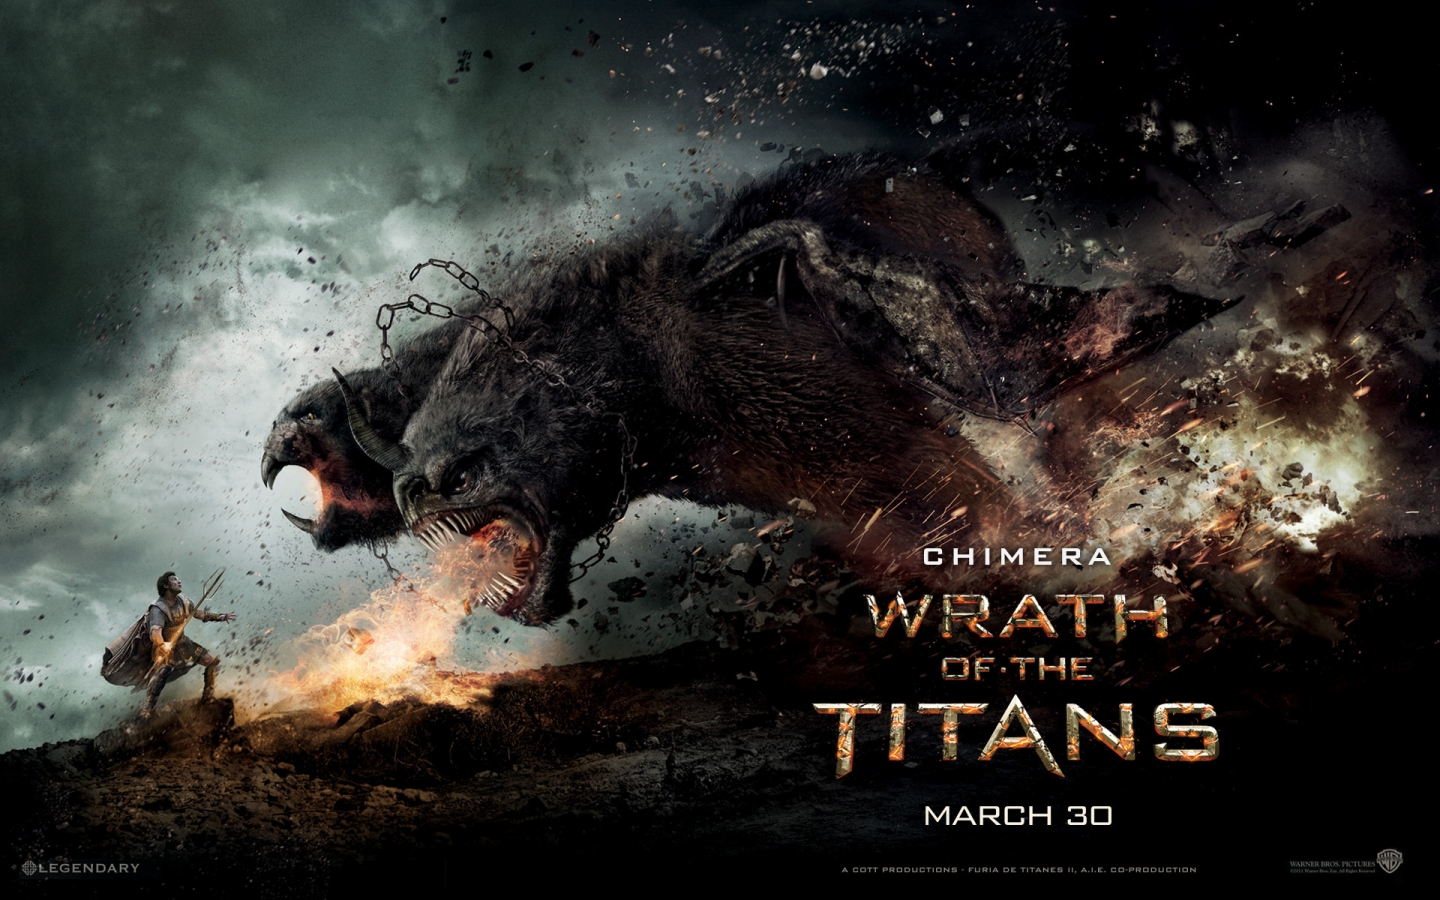 Chimera Wrath of the Titans for 1440 x 900 widescreen resolution